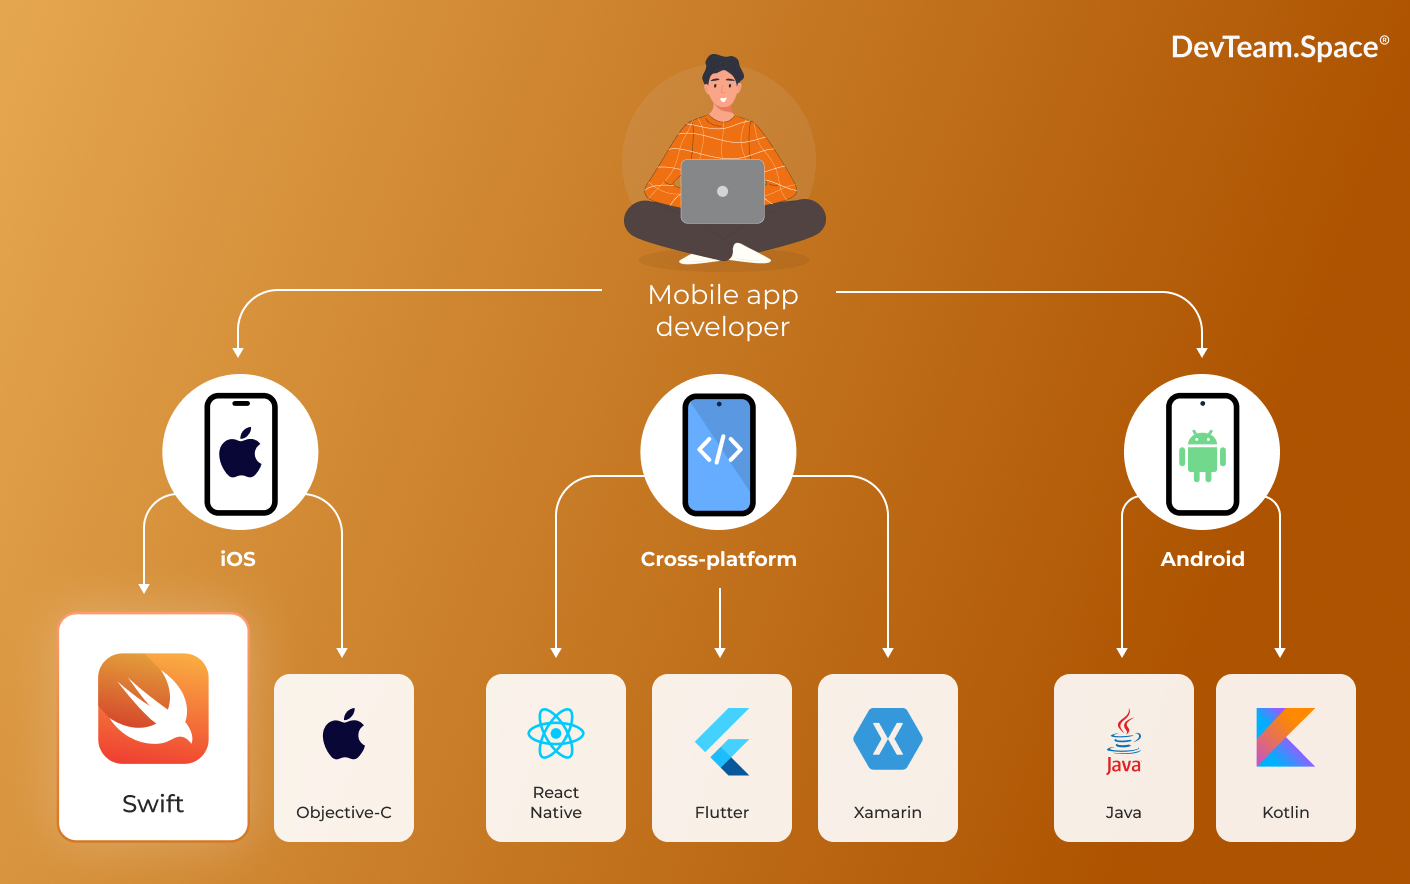 Image shows mobile app developer and the 3 main types of app development - Android, iOS, and Hybrid. Below each catagory are the main technologies of each Swift, Object C, Reach Native, Flutter, Xamarin, Java and Kotlin